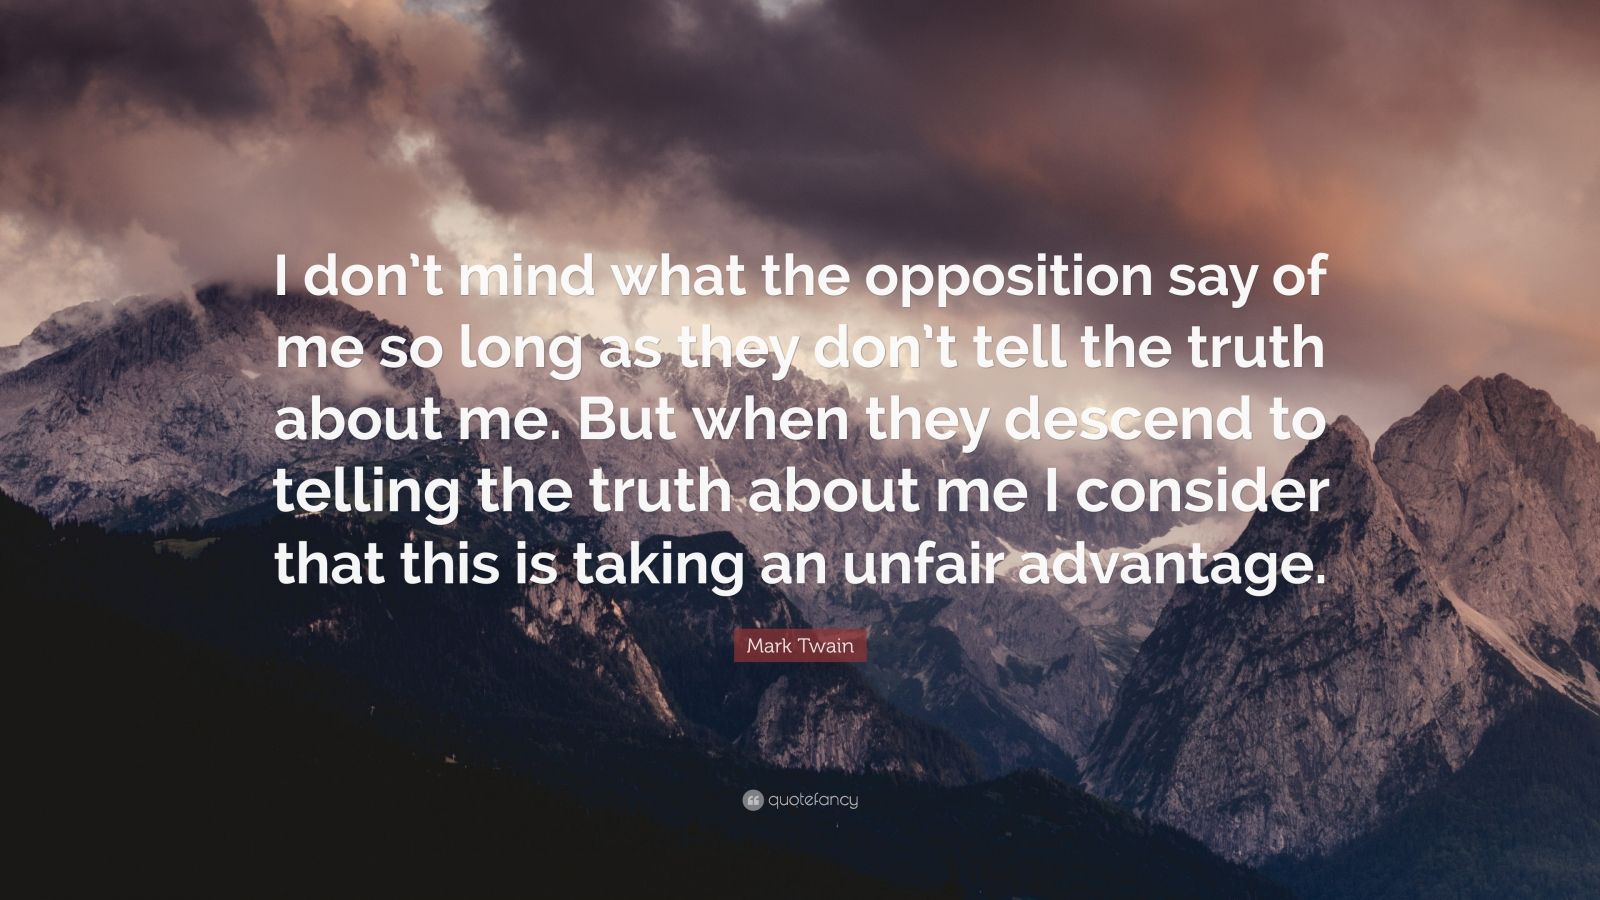 Mark Twain Quote: "I don't mind what the opposition say of ...